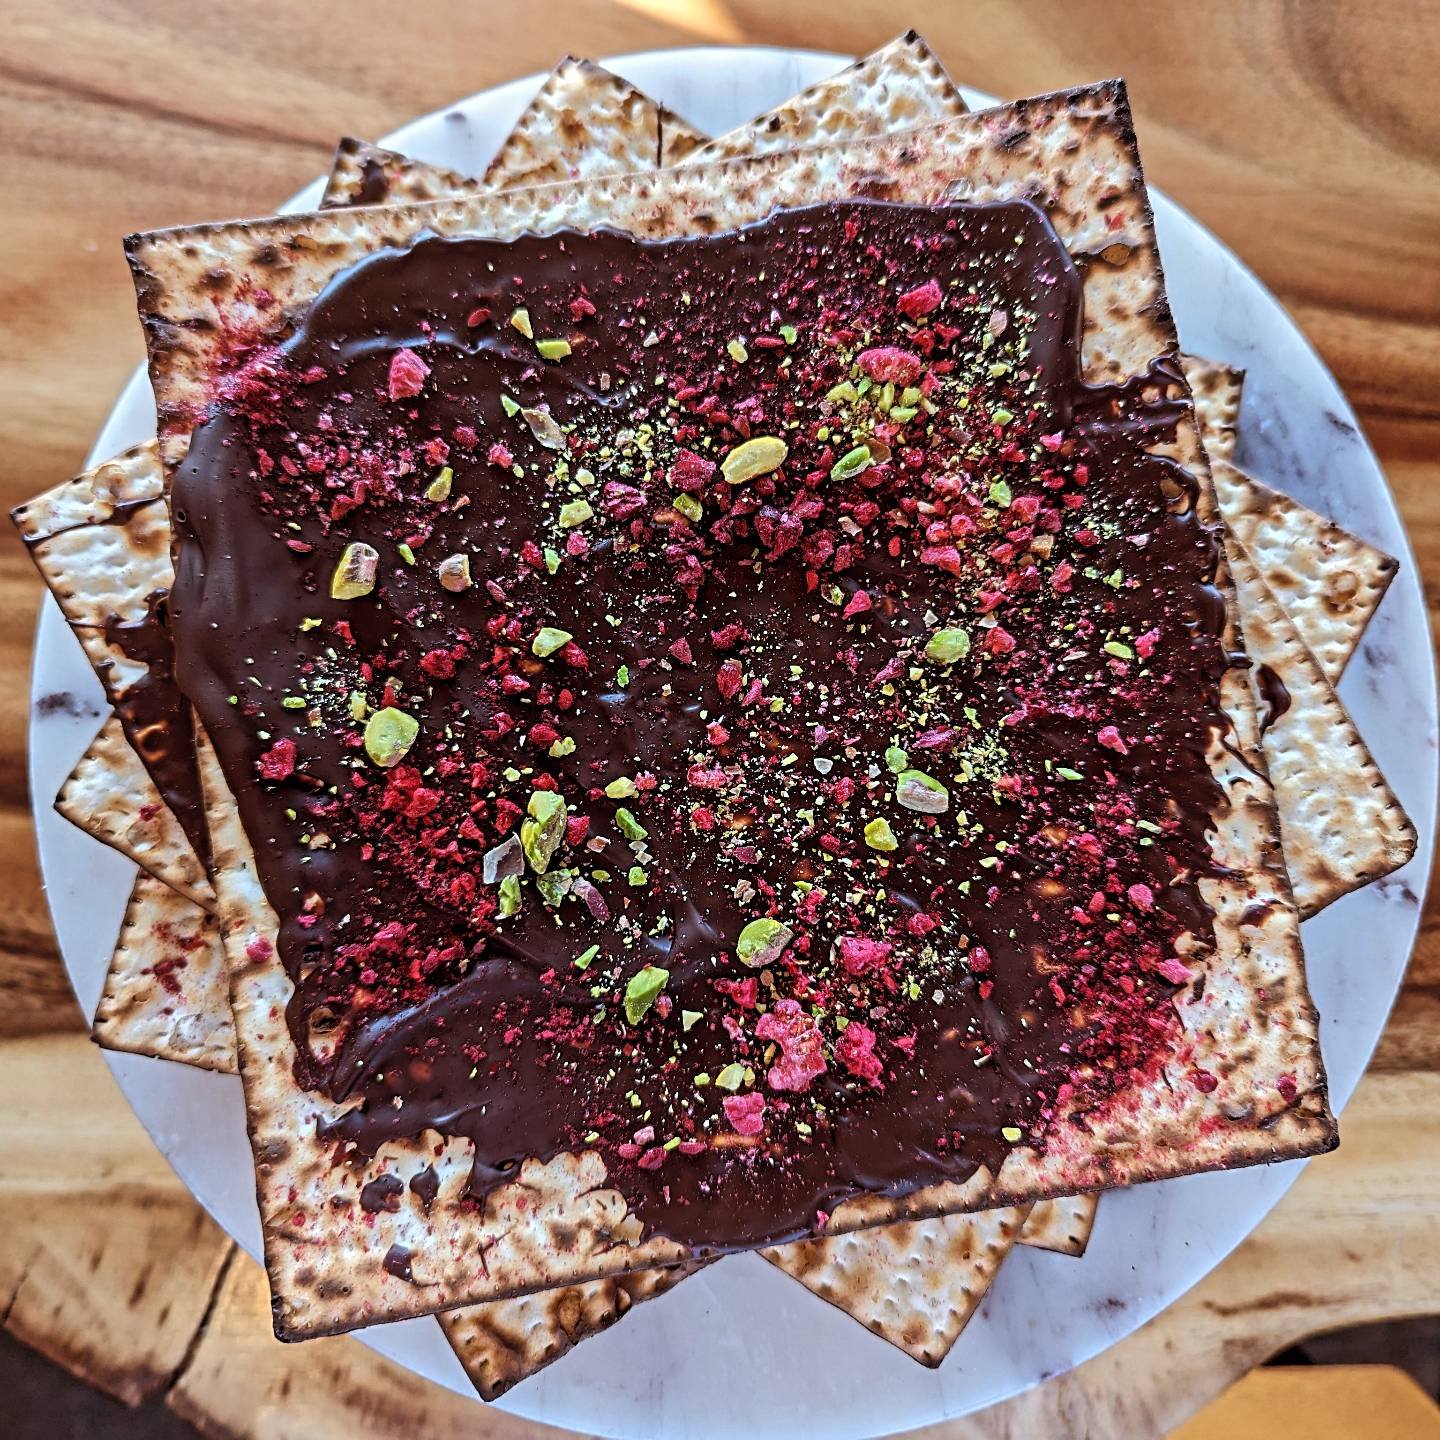 Matzo Bark, available all week! 🌴
Dark Chocolate
Mixed berries
Pistachios 
4 pack for $18
.
.
.
.
.